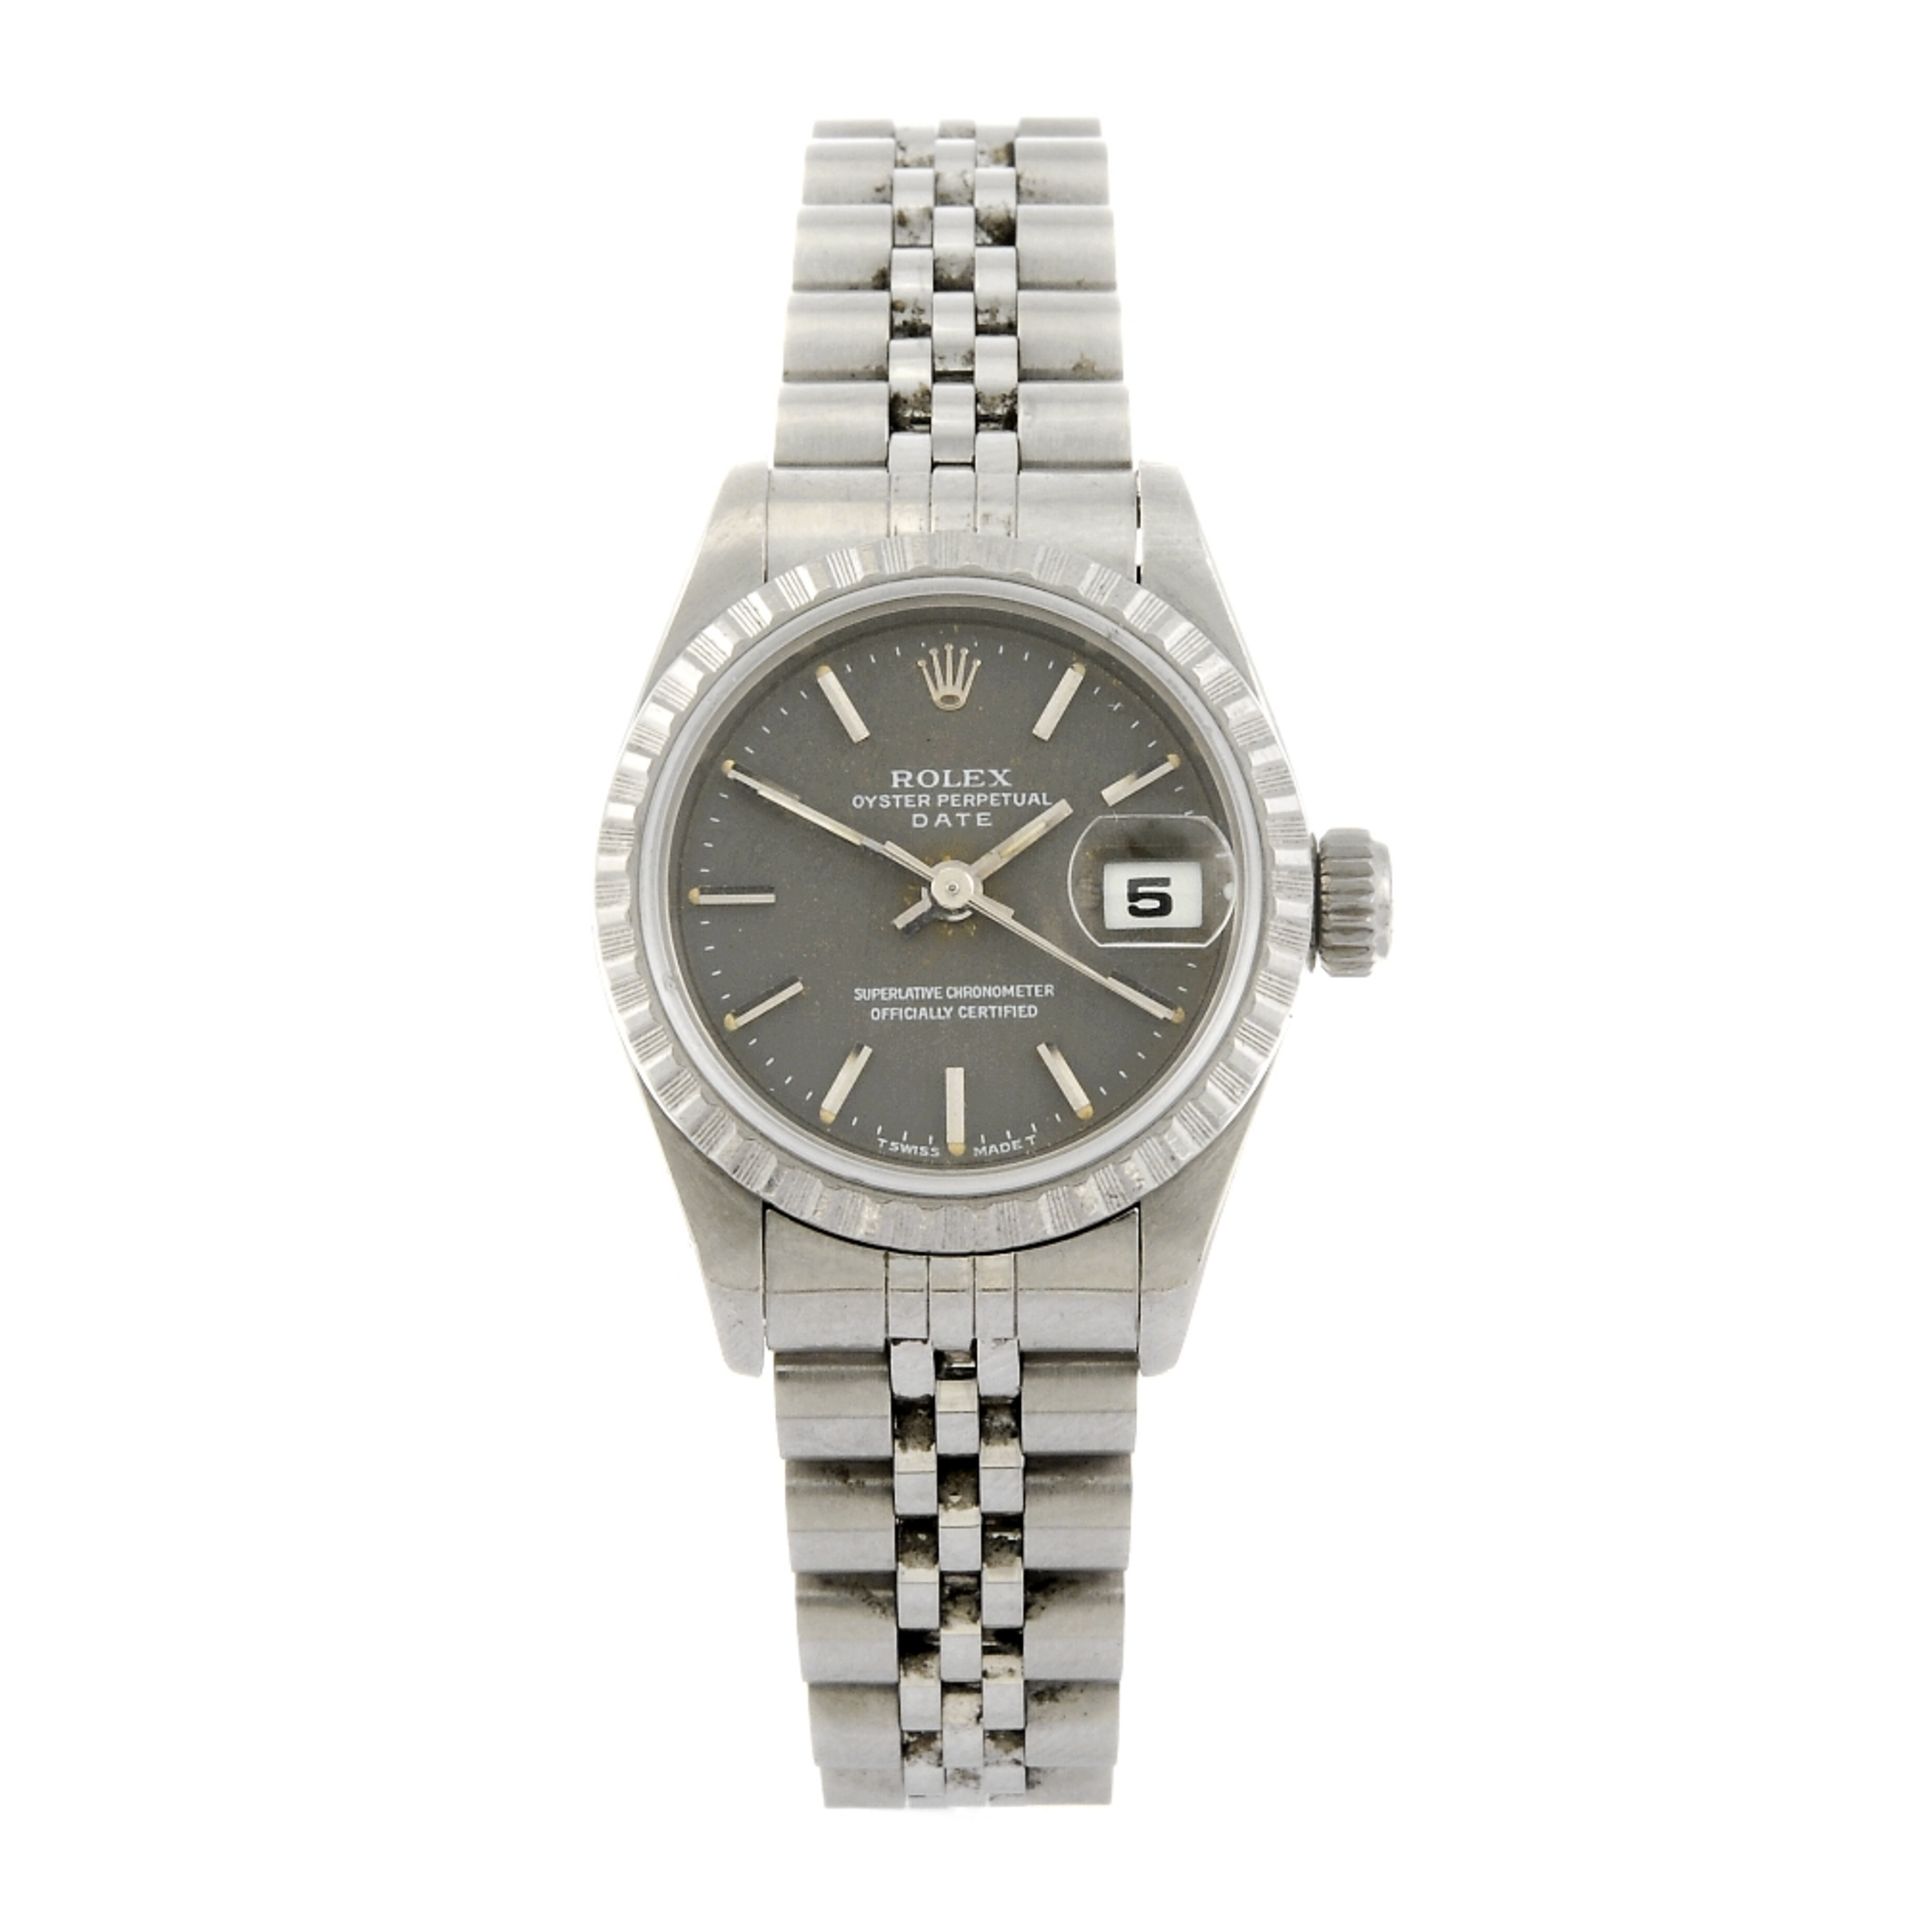 ROLEX - a lady`s Oyster Perpetual Date bracelet watch. Circa 1993. Reference 69240, serial S806717.